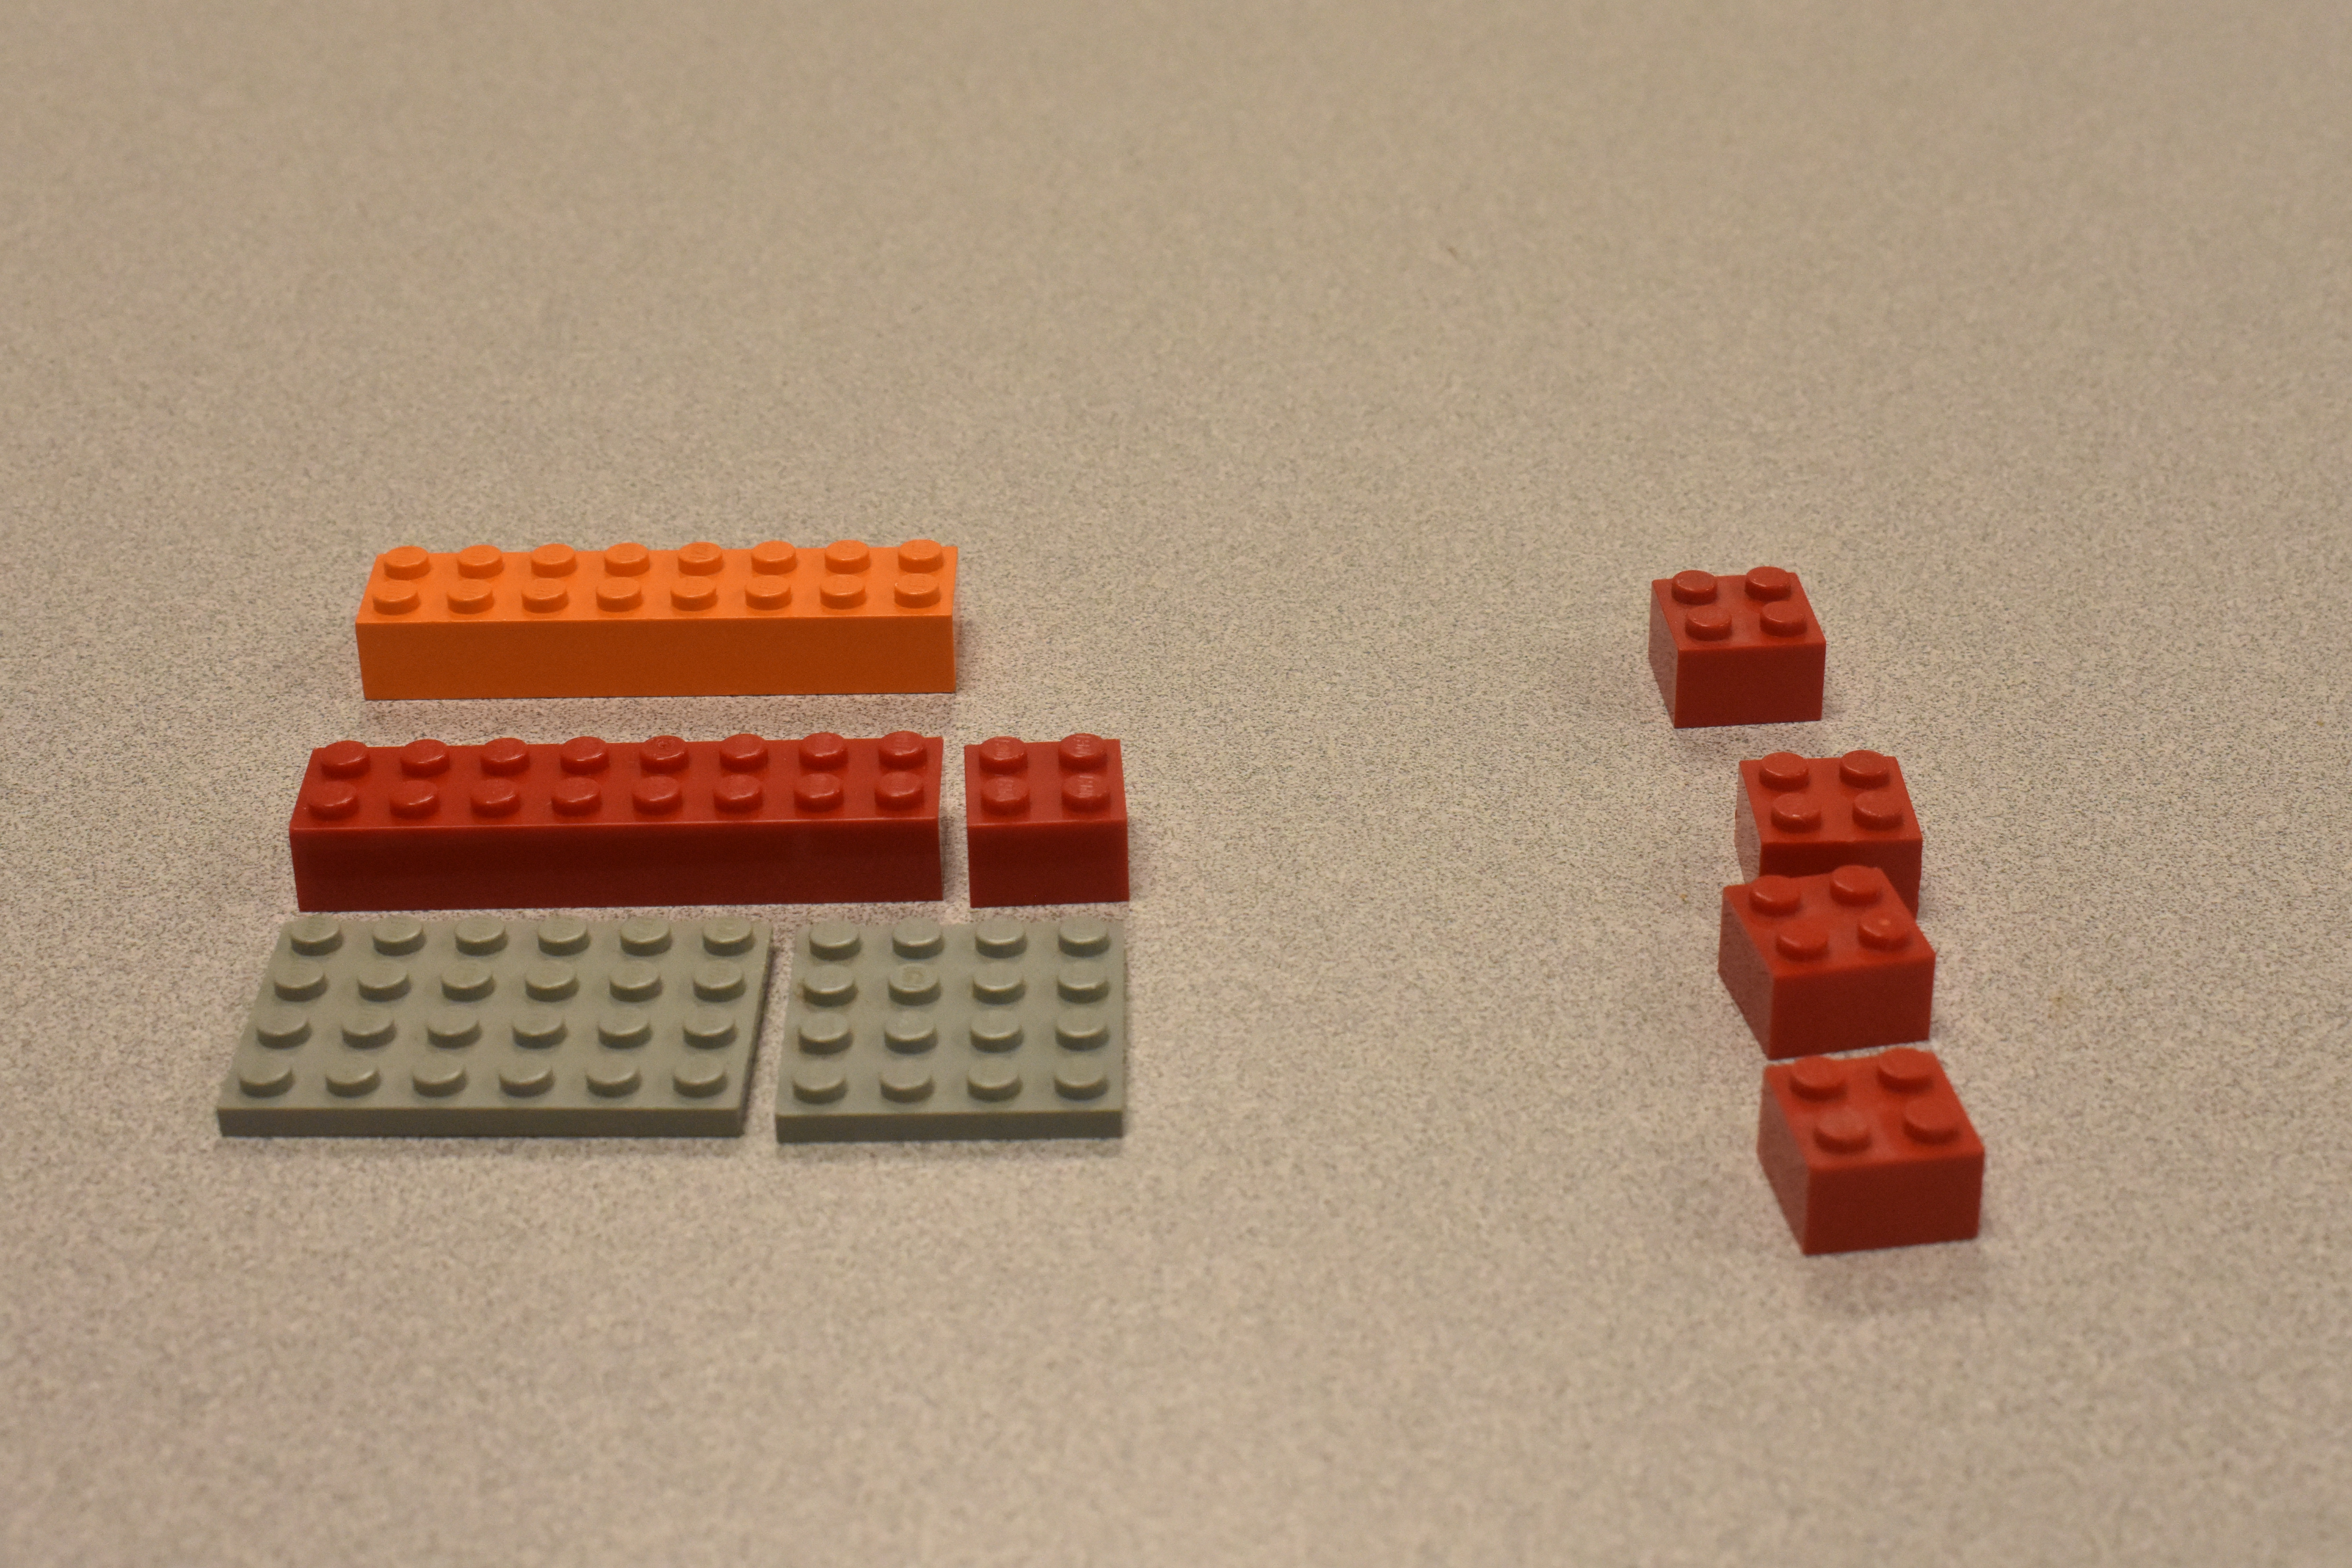 Lego pieces needed to build an impossible triangle.